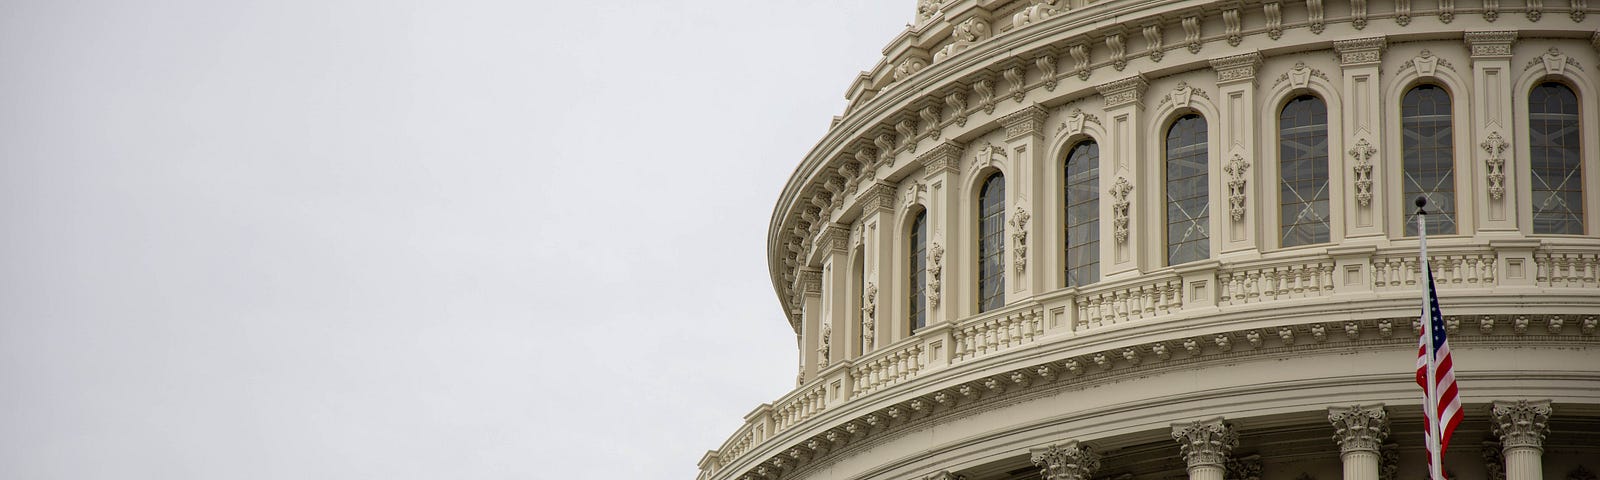 An exterior glimpse of the United States Capital building in Washington.